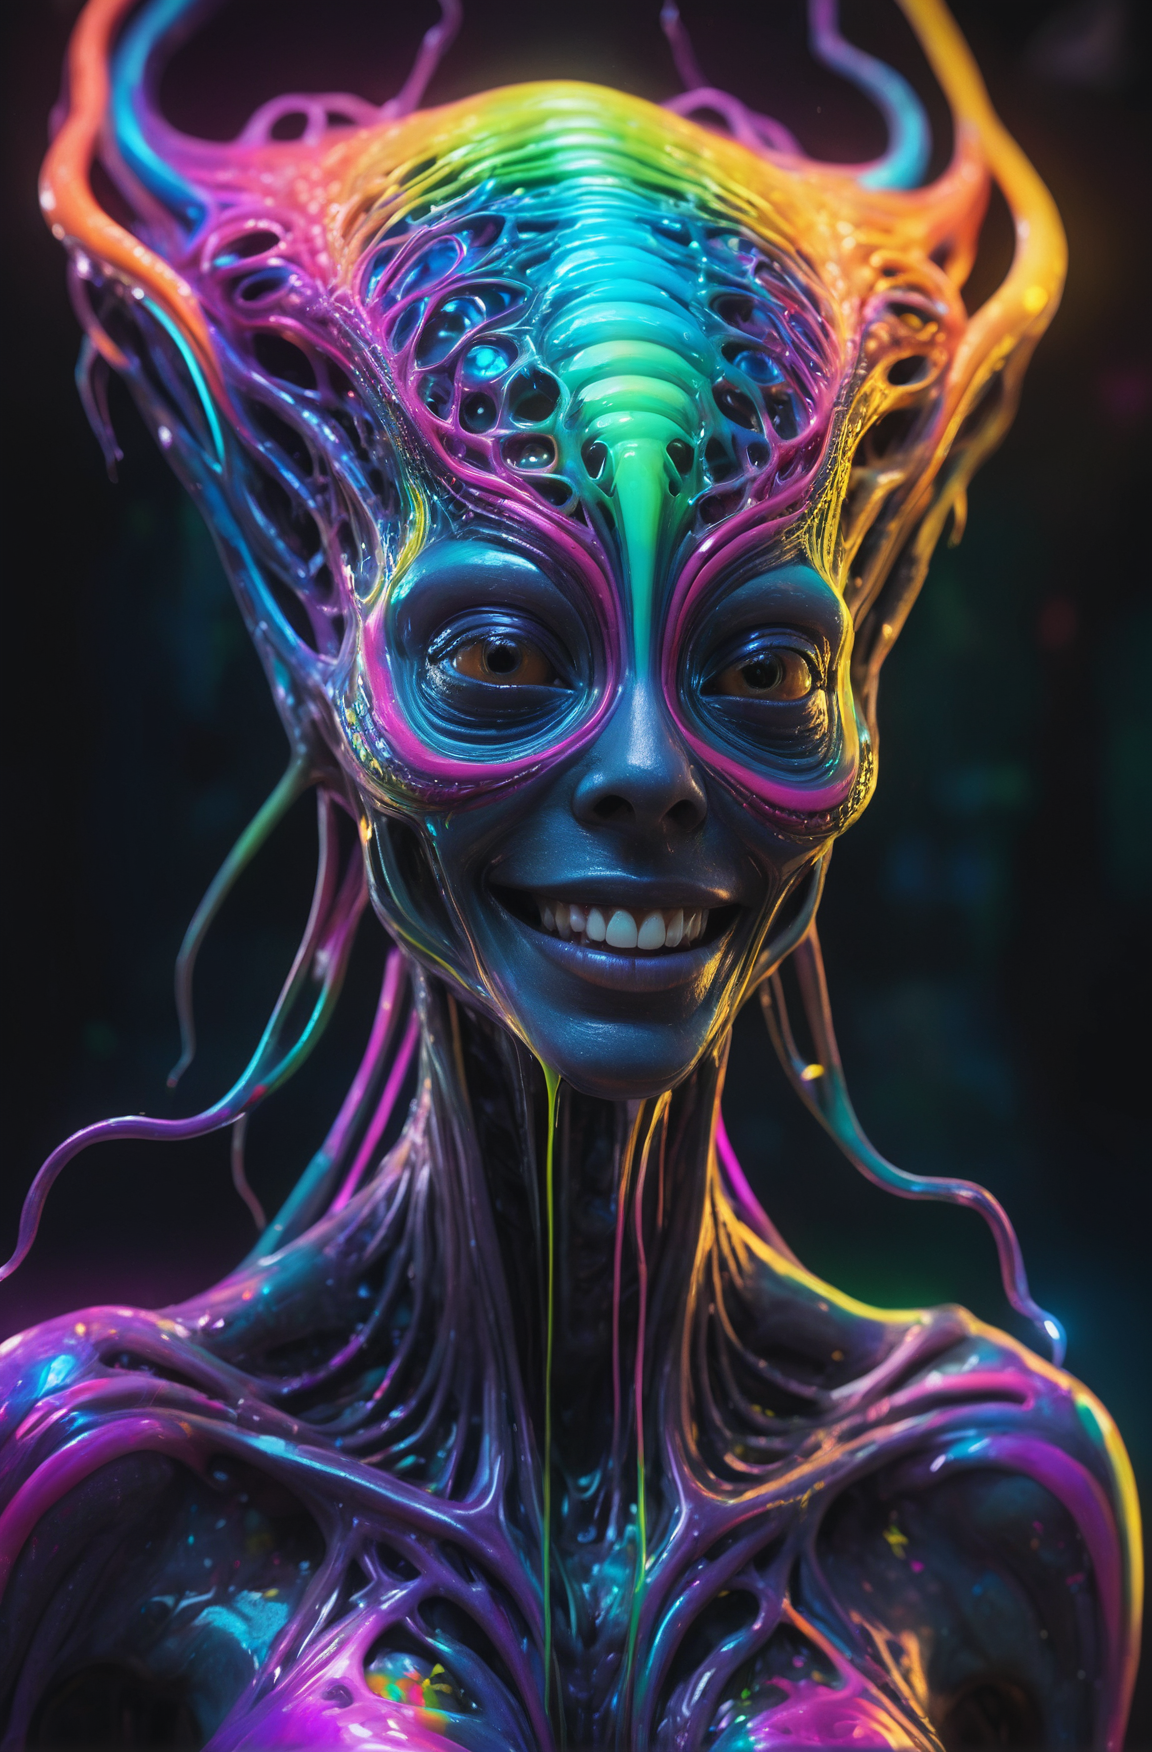 impossibly beautiful portrait of alien shapeshifter entity, insane smile, intricate complexity, surreal horror, inverted n...